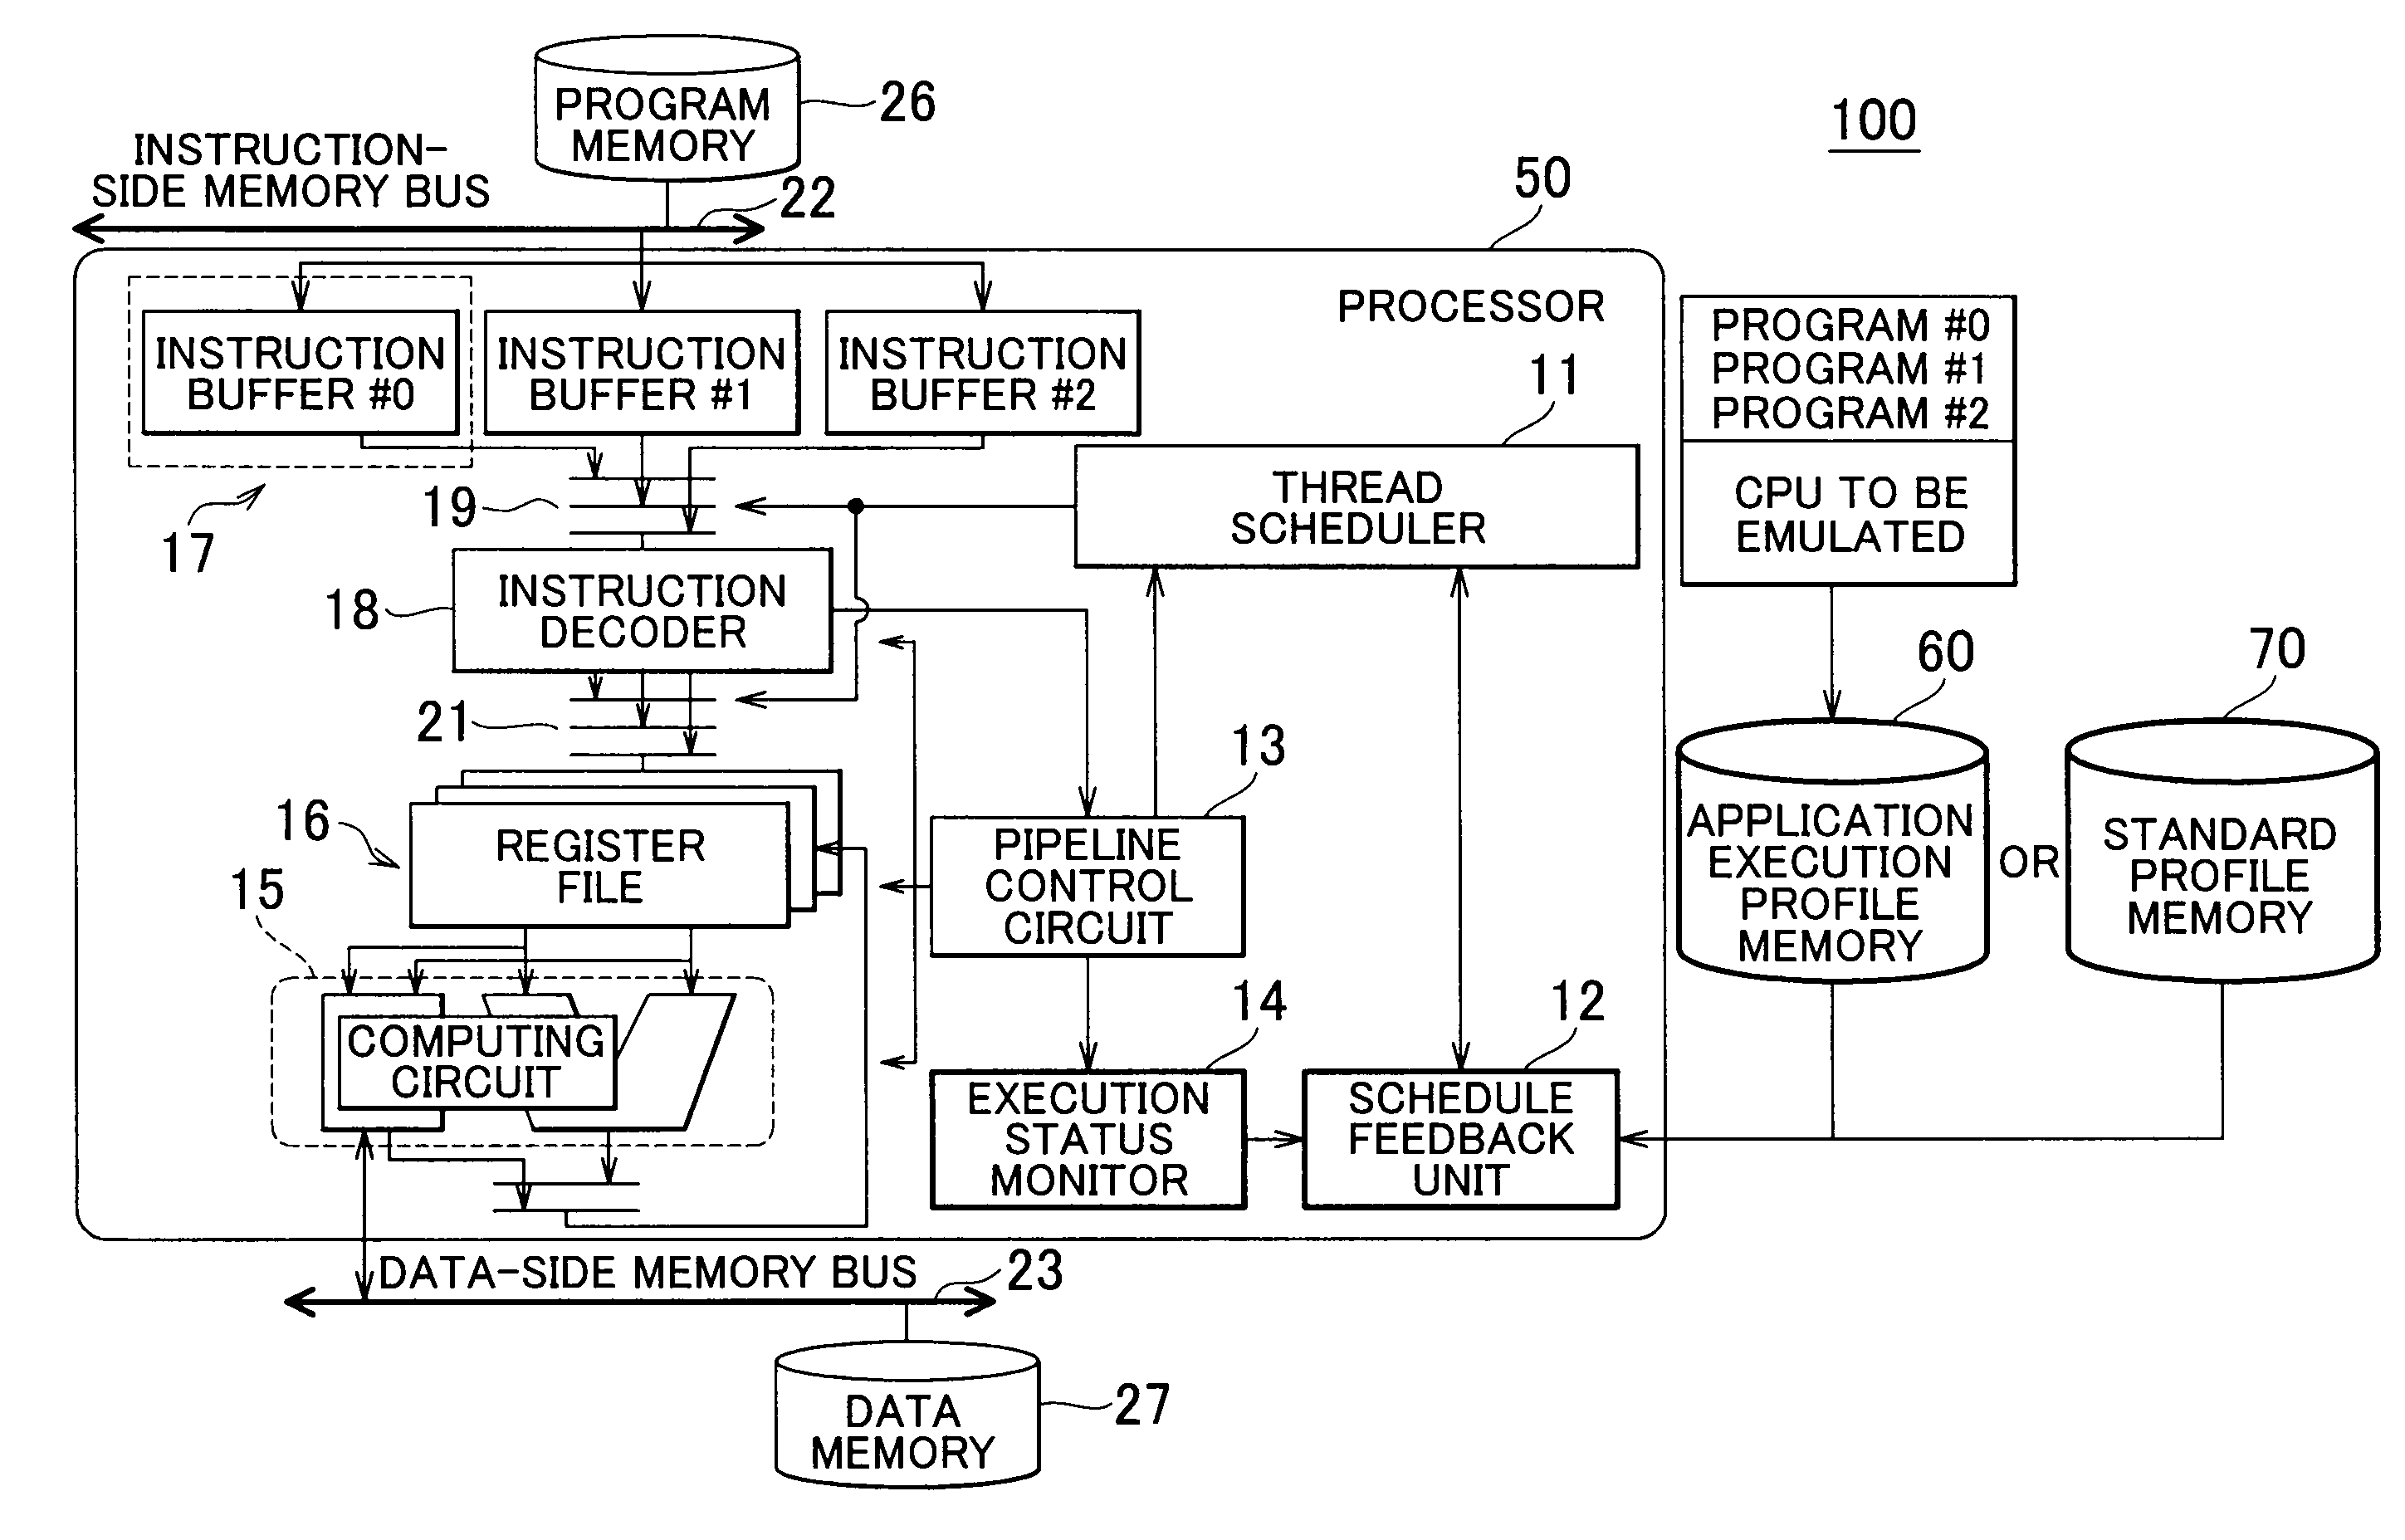 Multithread execution device and method for executing multiple threads